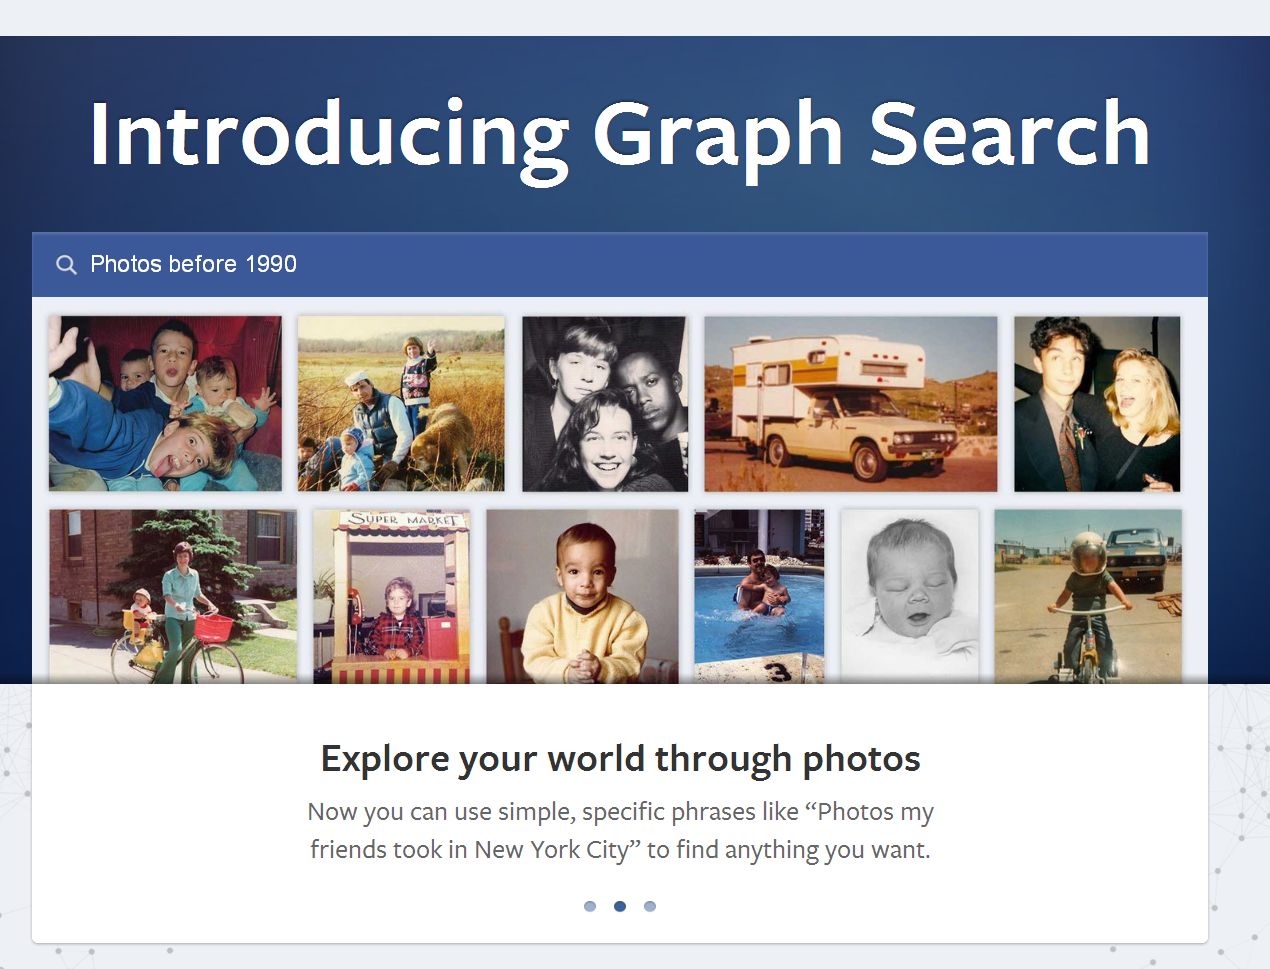 Facebook’s new graph search